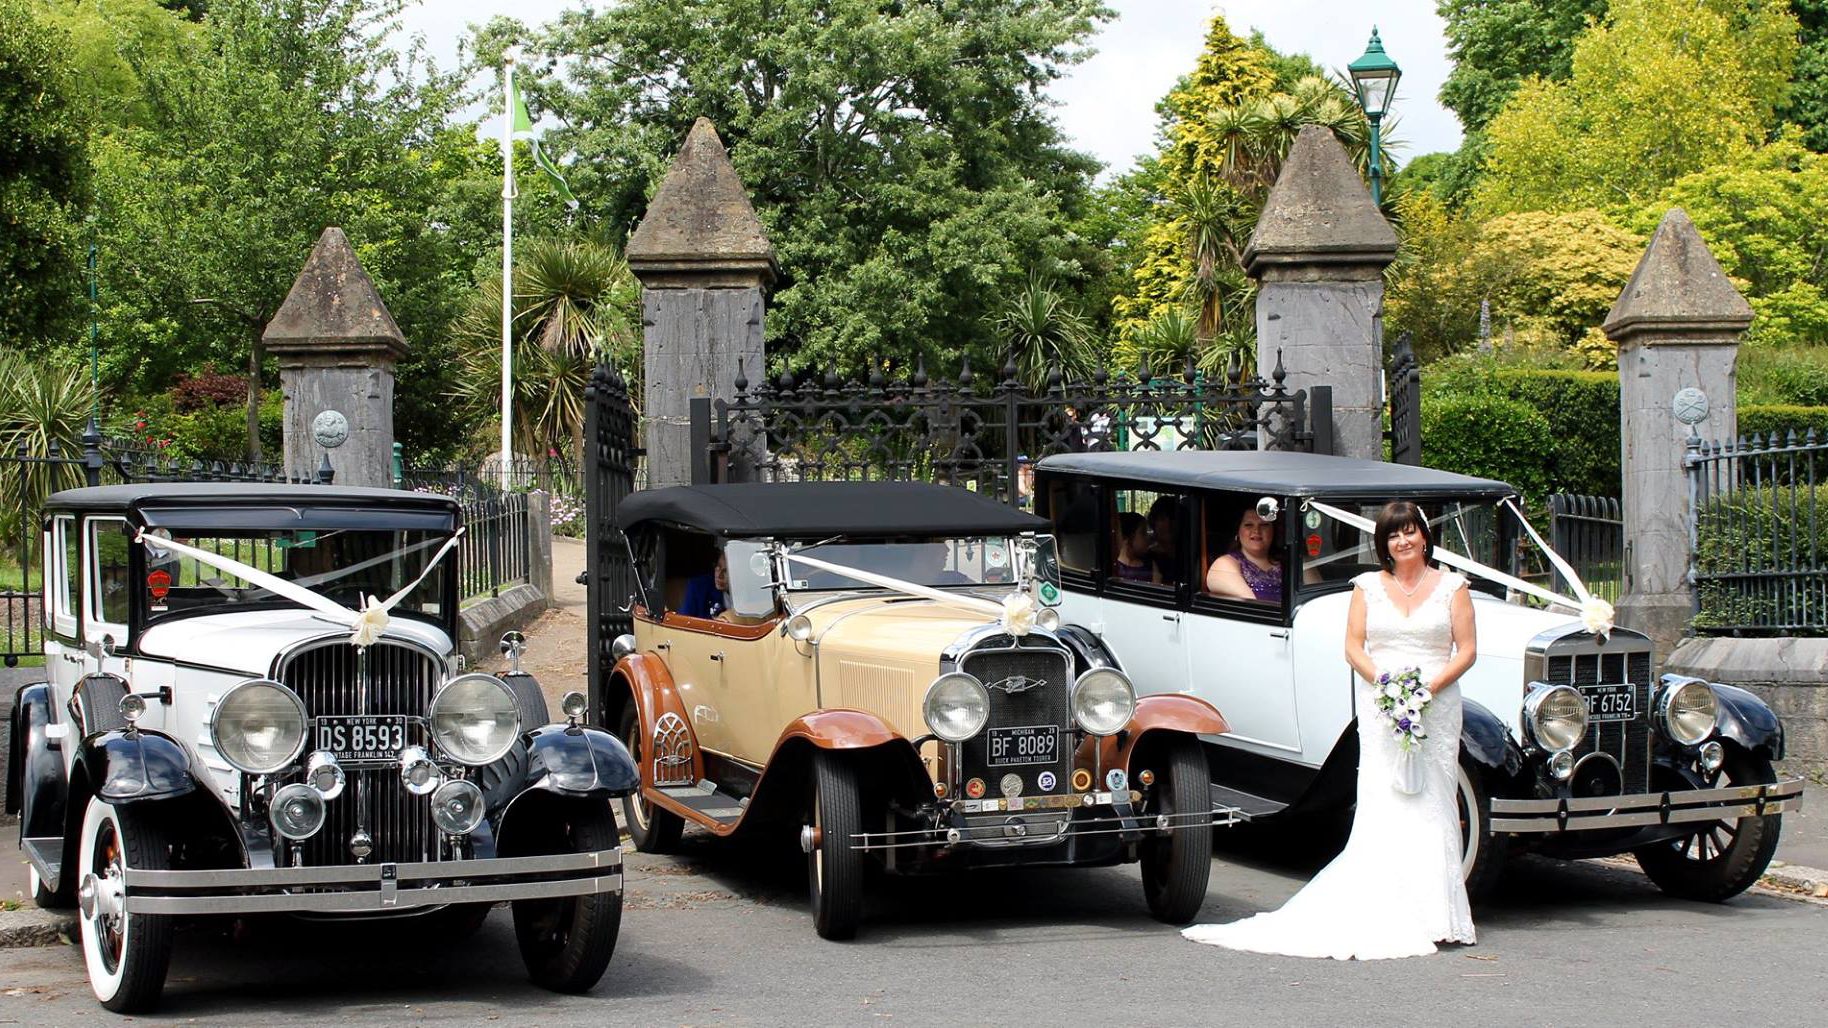 Three vintage wedding cars decorated with white ribbons at a local Exeter wedding. All three vehicles are parked side-by-side with bride wearing a white dress holding a bridal bouq